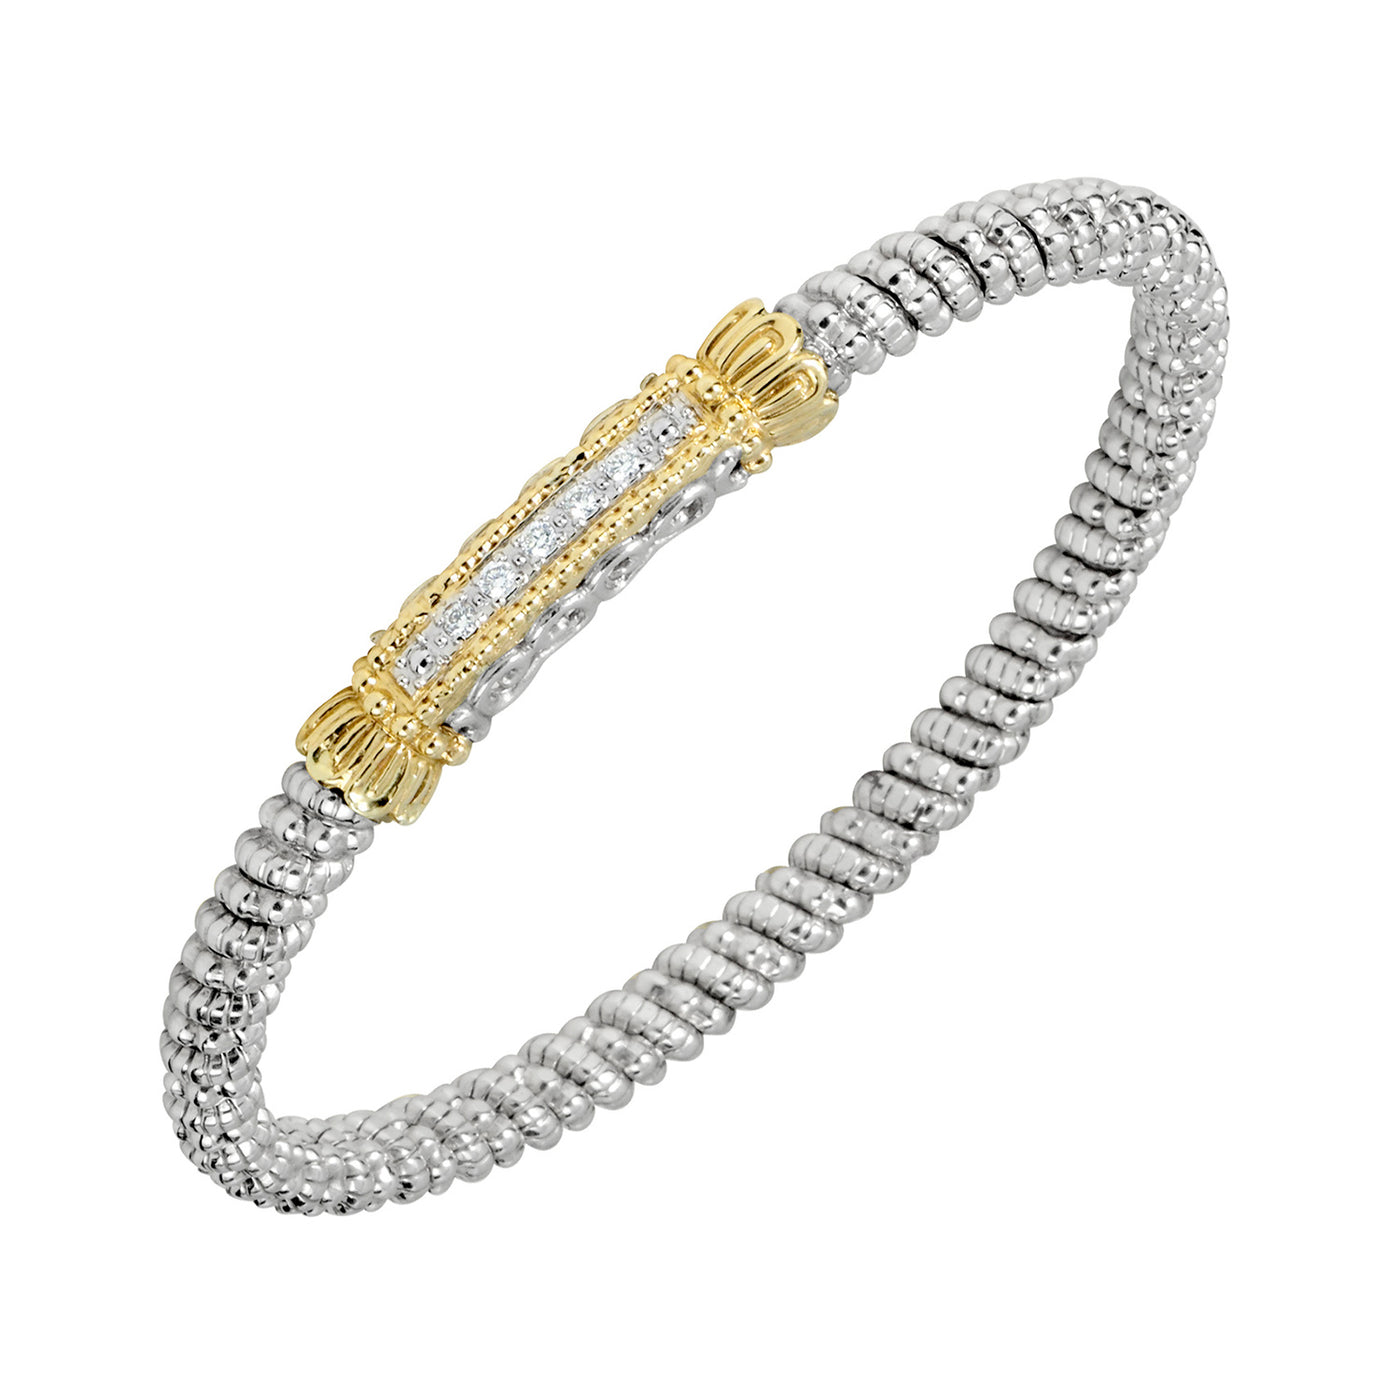 Vahan Sterling Silver and 14k Yellow Gold Moiré Beaded® Bangle Bracelet with Diamonds – 21877D